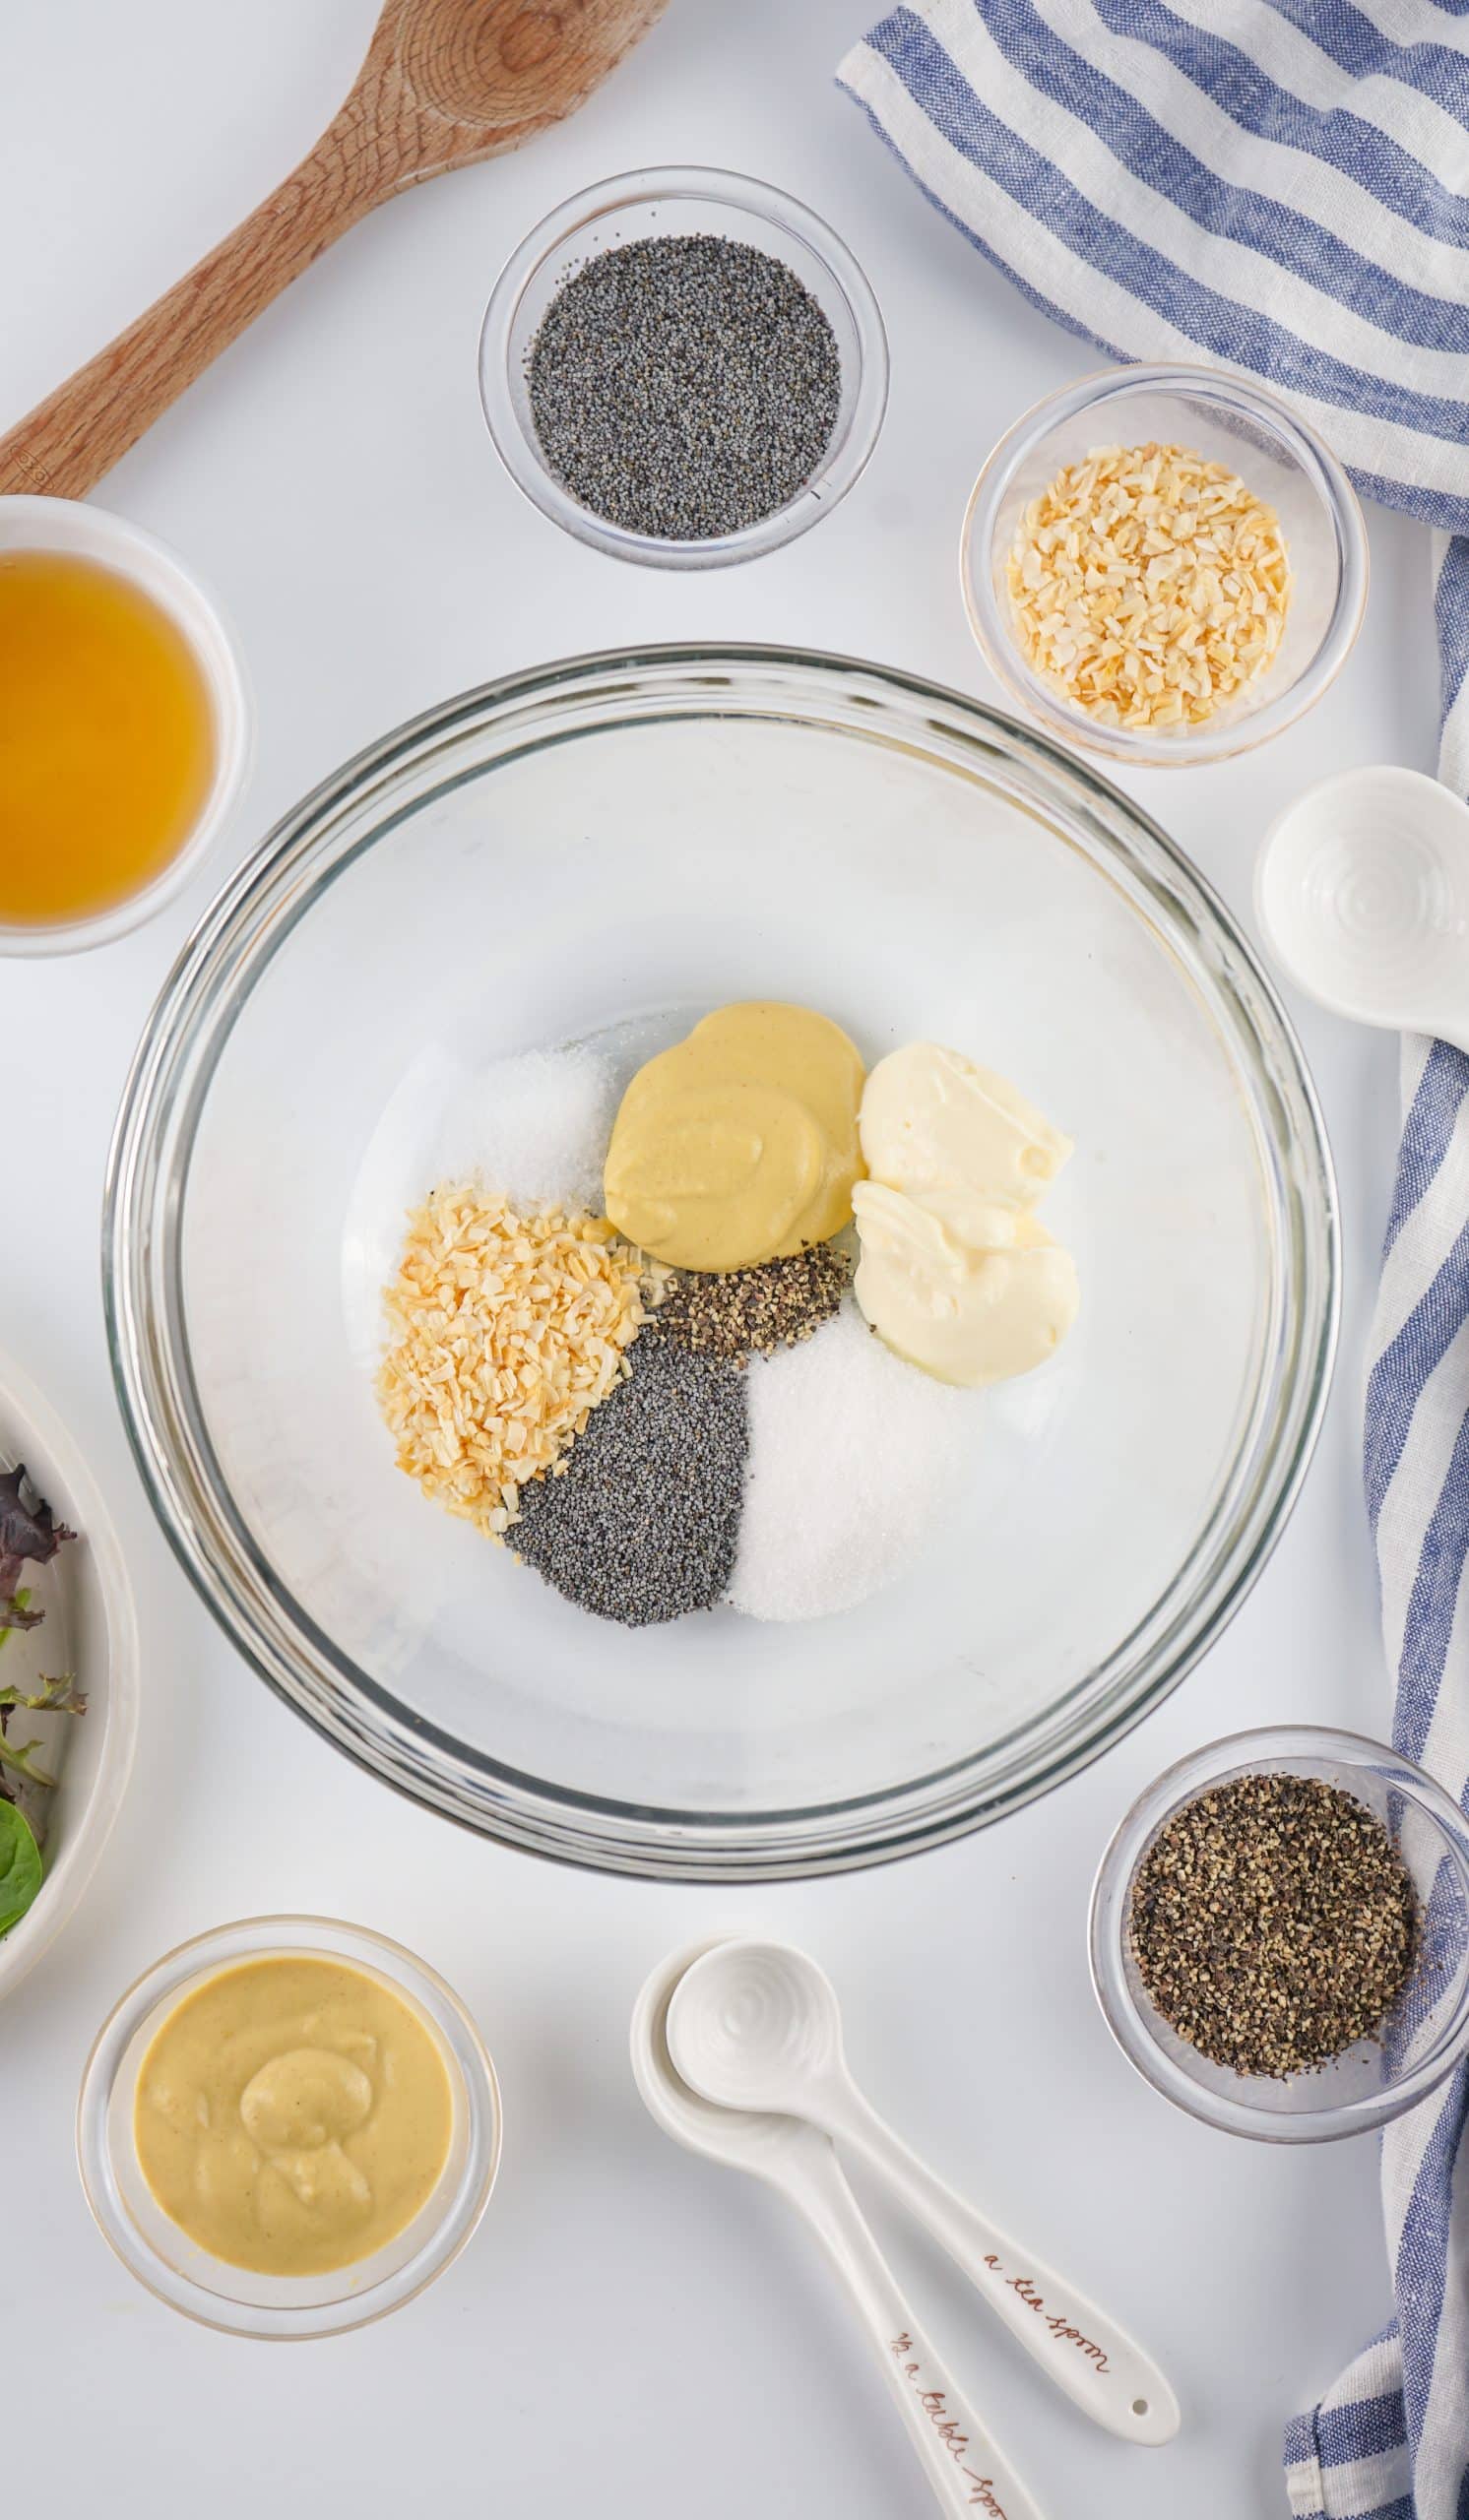 homemade poppy seed dressing ingredients in a glass bowl